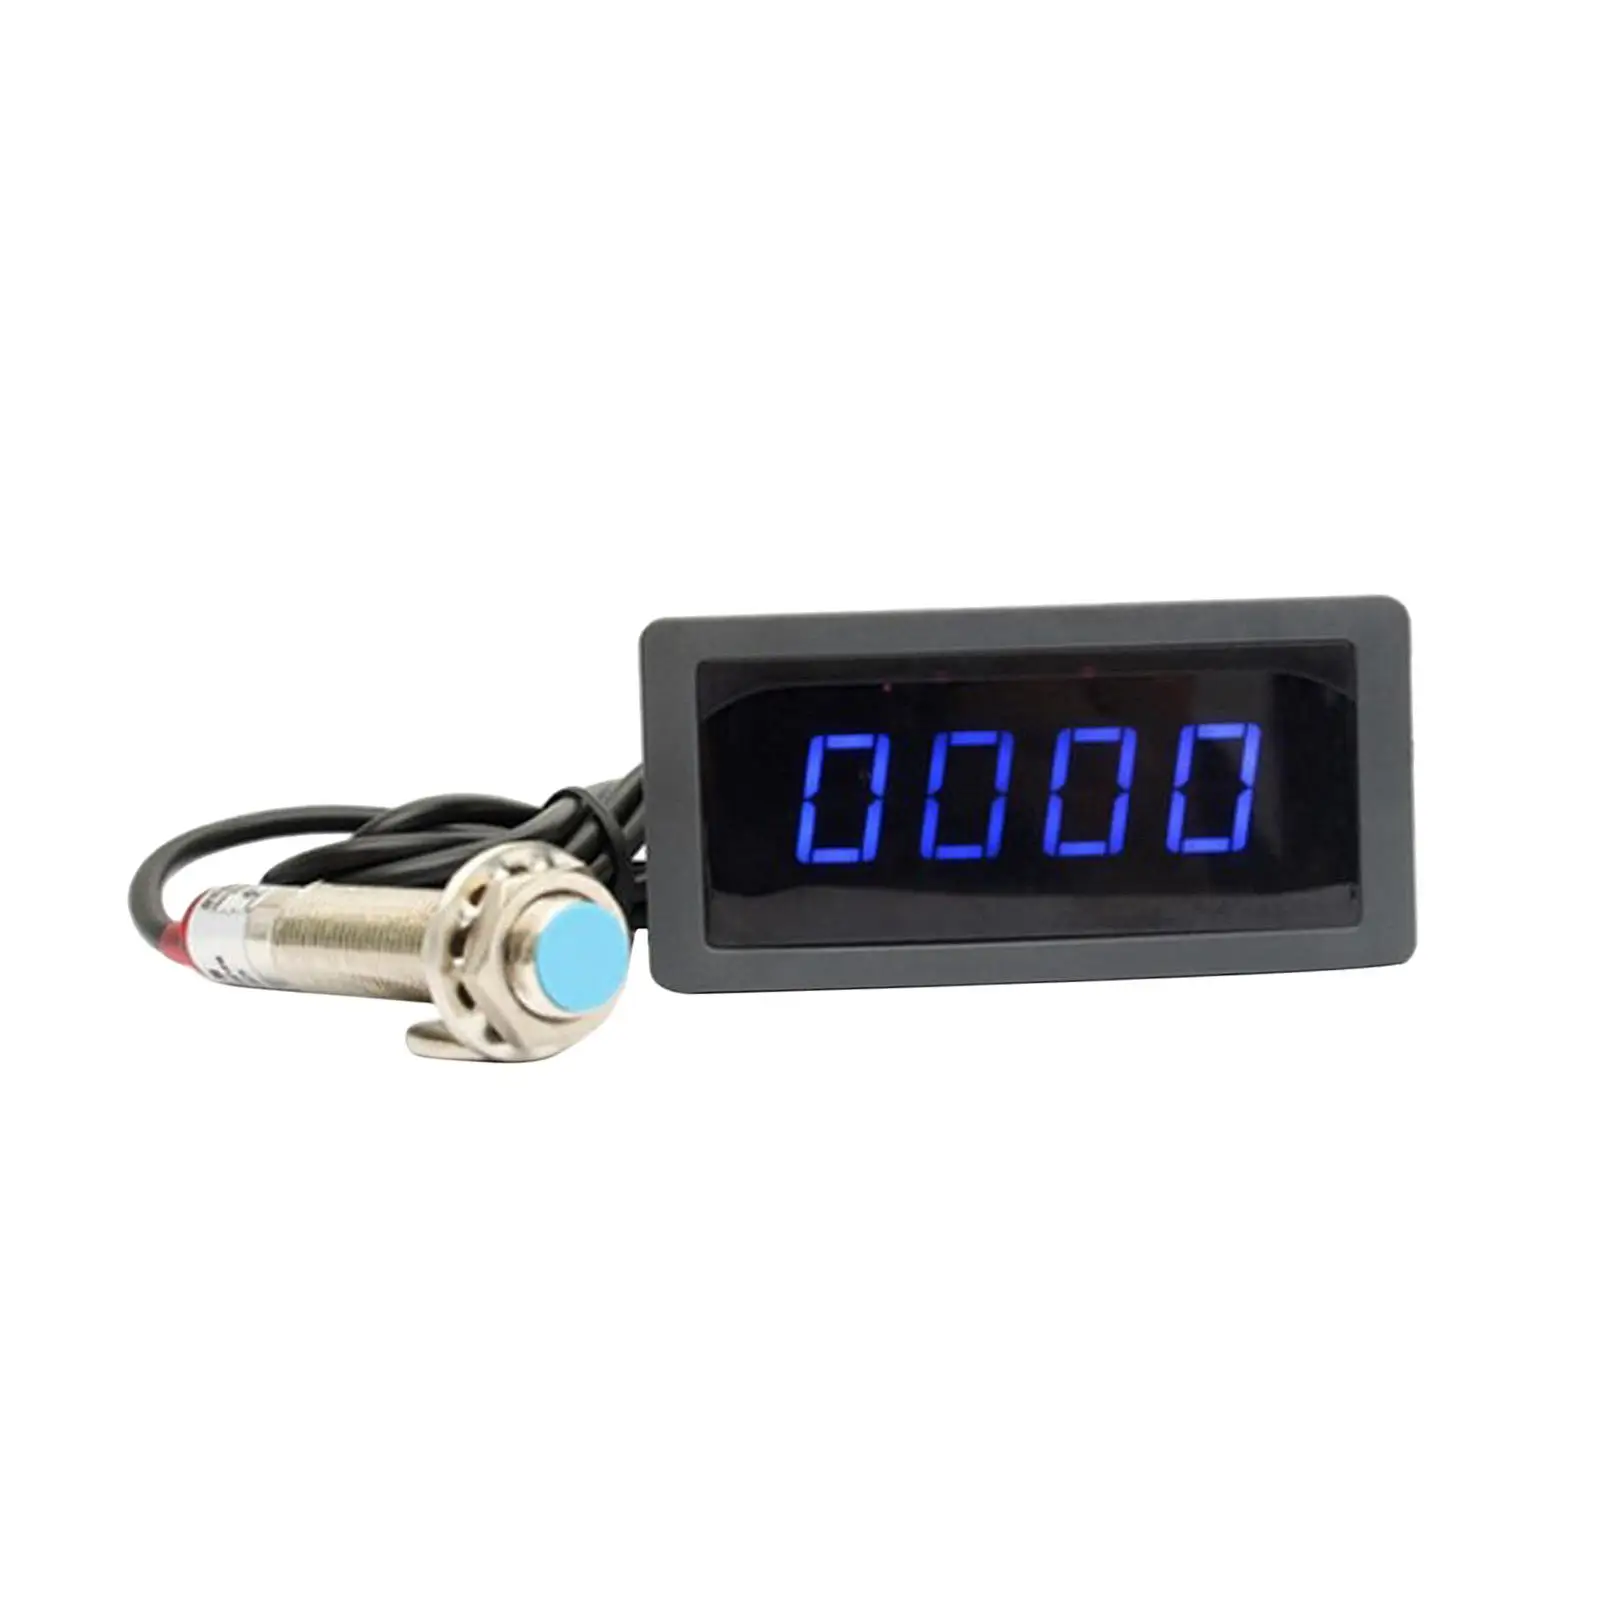 Compact Digital Tachometer RPM Meter LED Tachometer RPM Speed Meter with Switch